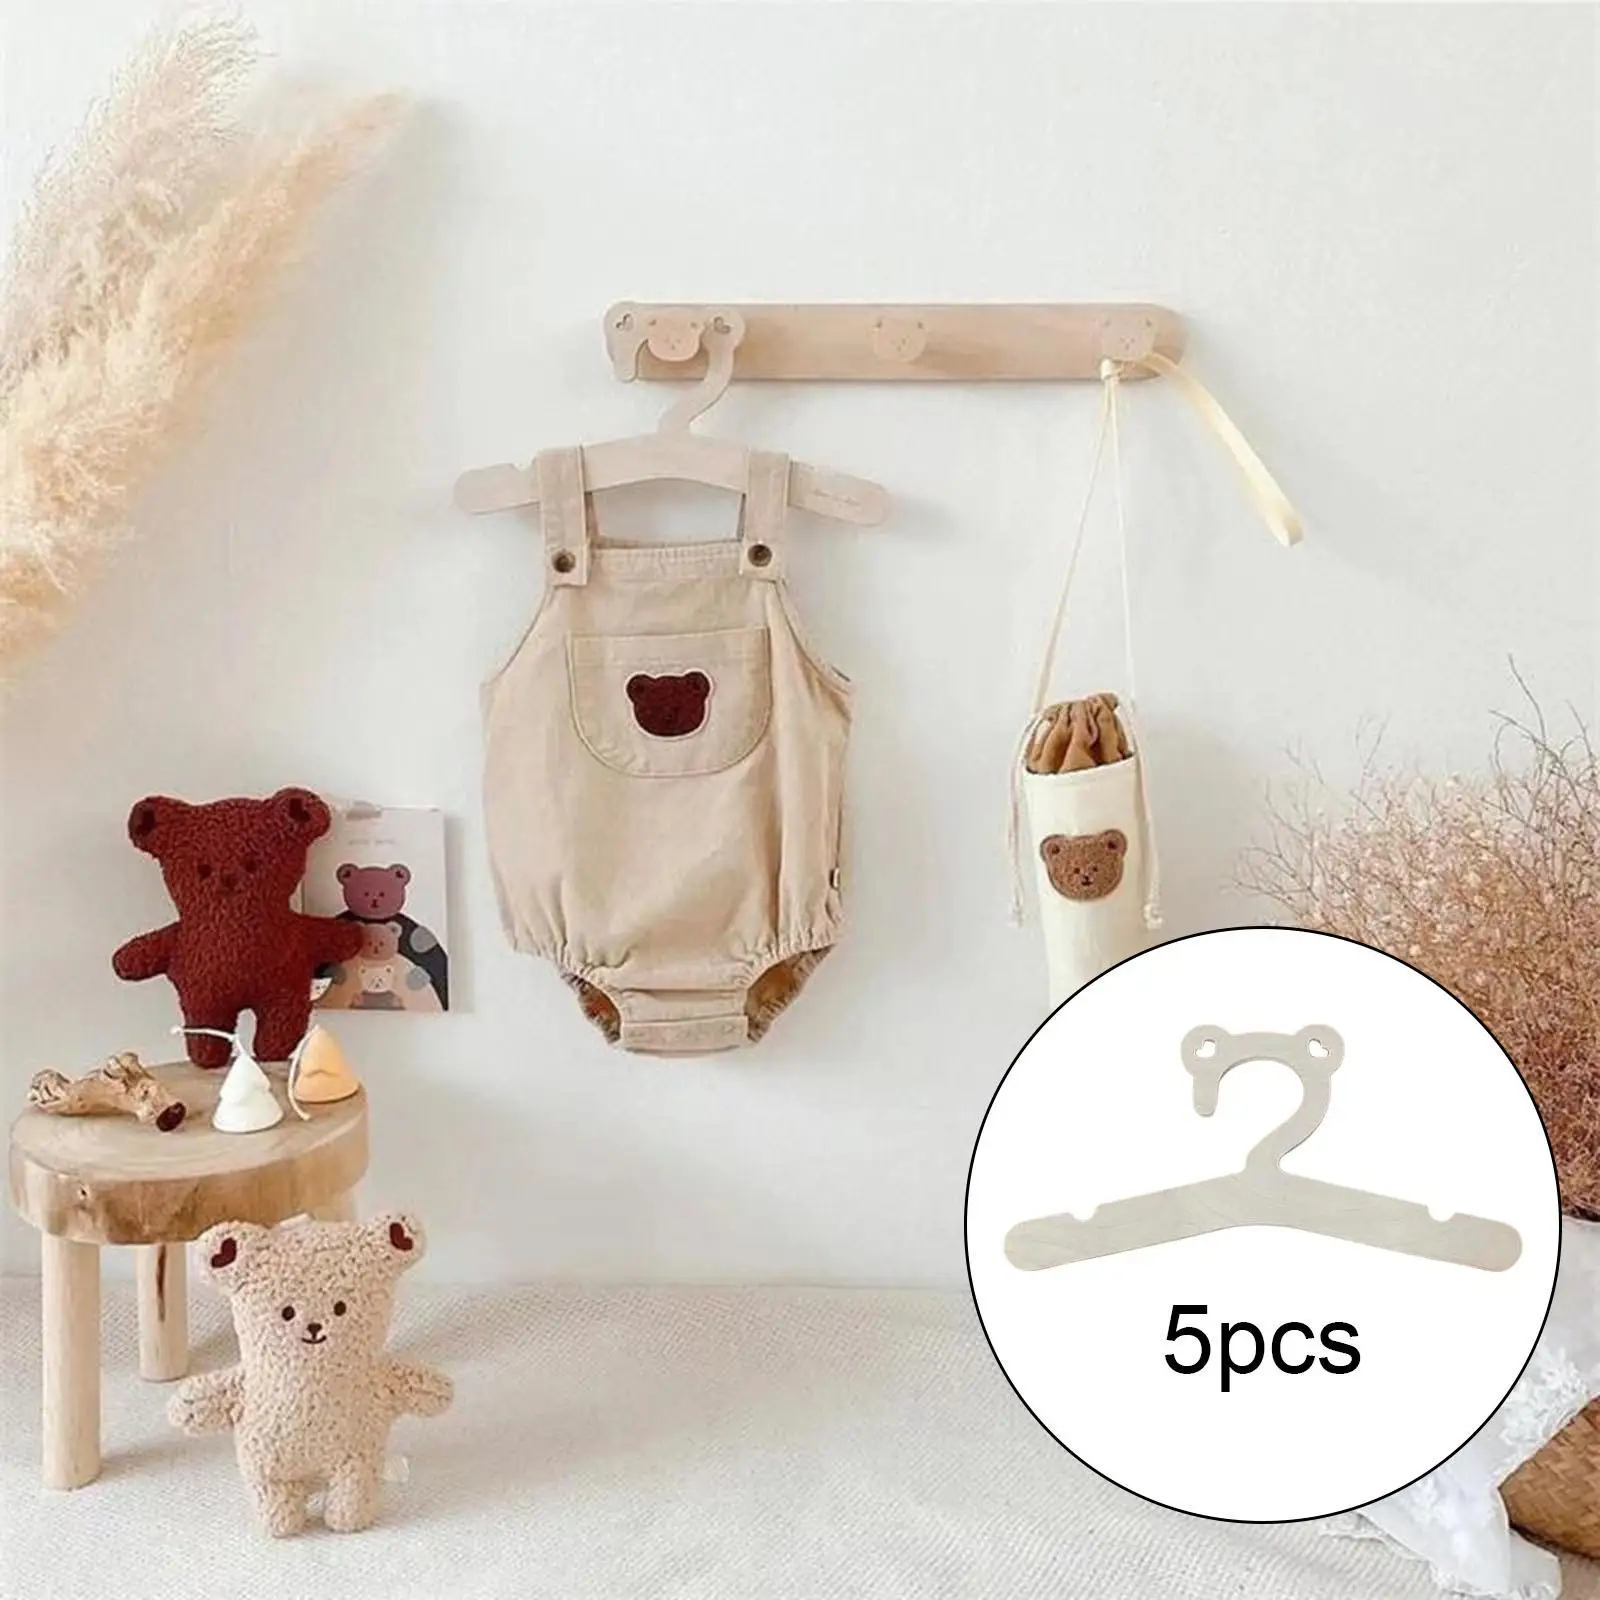 5 Pieces Wooden Creative Cute Accessories Children Clothes Hanger Hanger Rack Baby Clothes for Coat Pants Newborn Baby Gifts